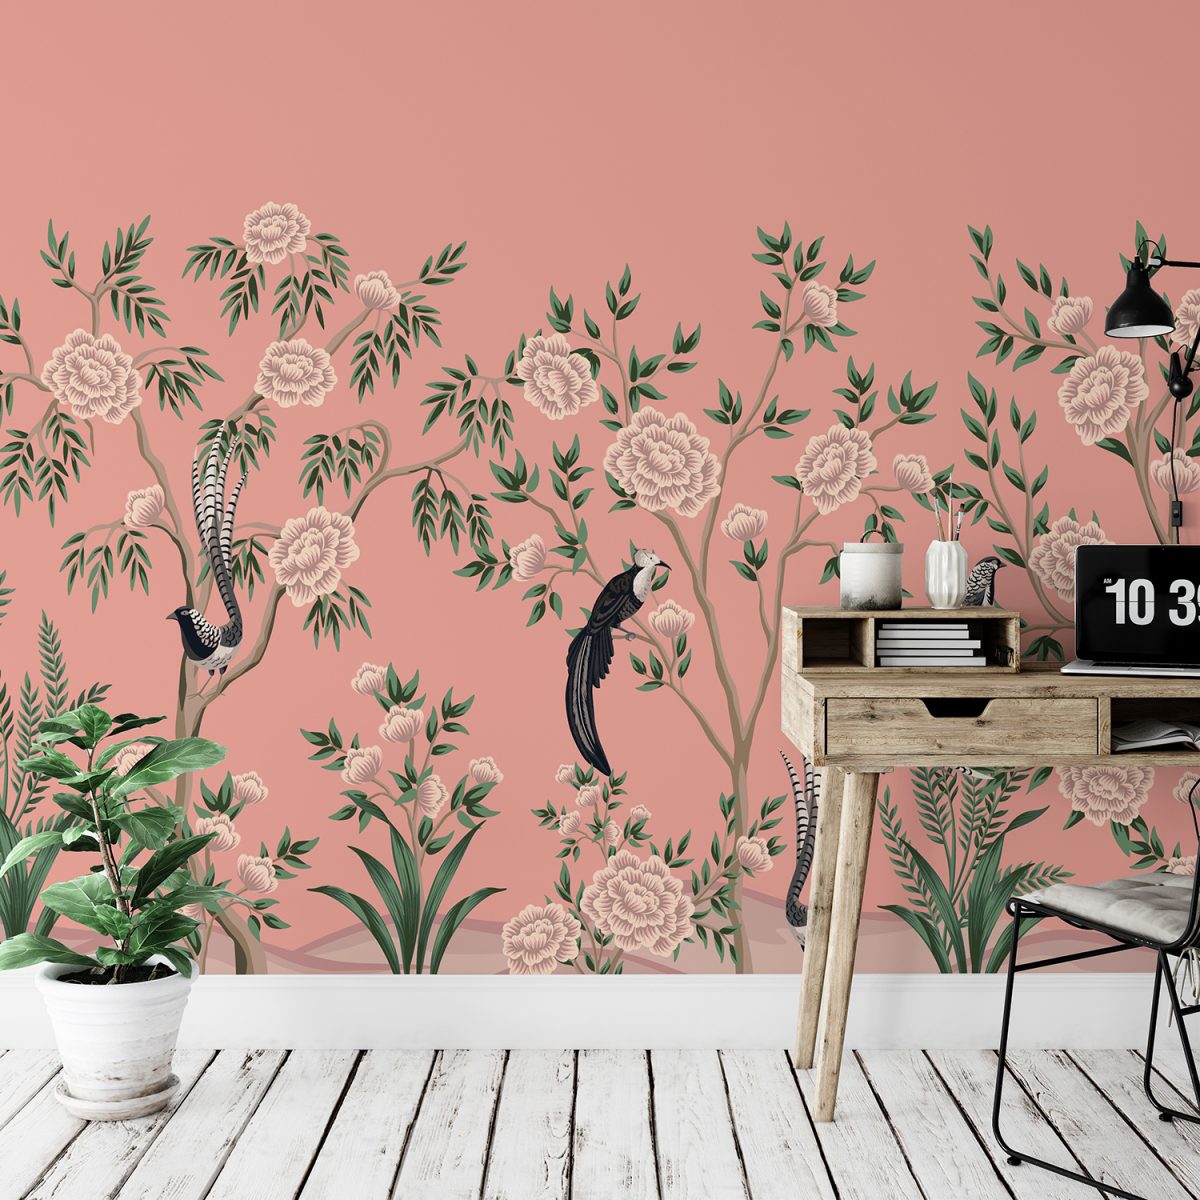 Custom wallpaper for your walls: How to choose ?